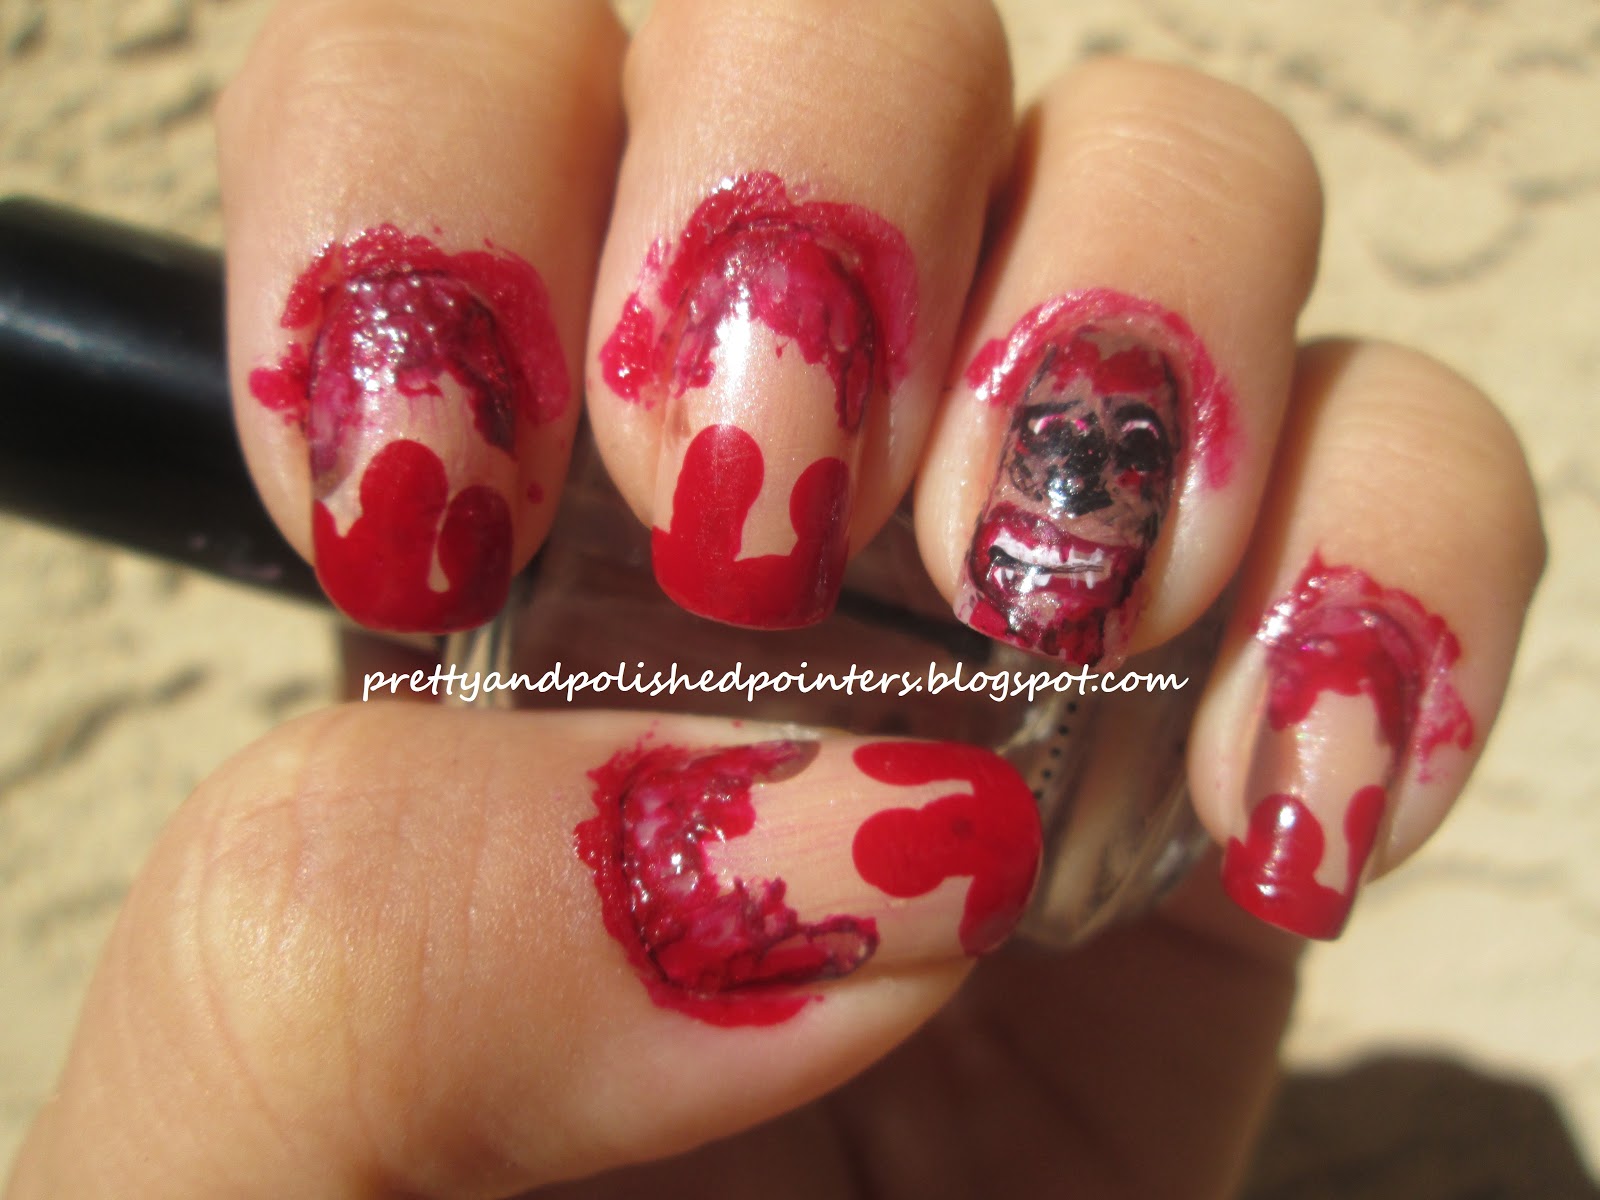 10. "Zombie Nails: 20 Scary Designs for Halloween" - wide 1